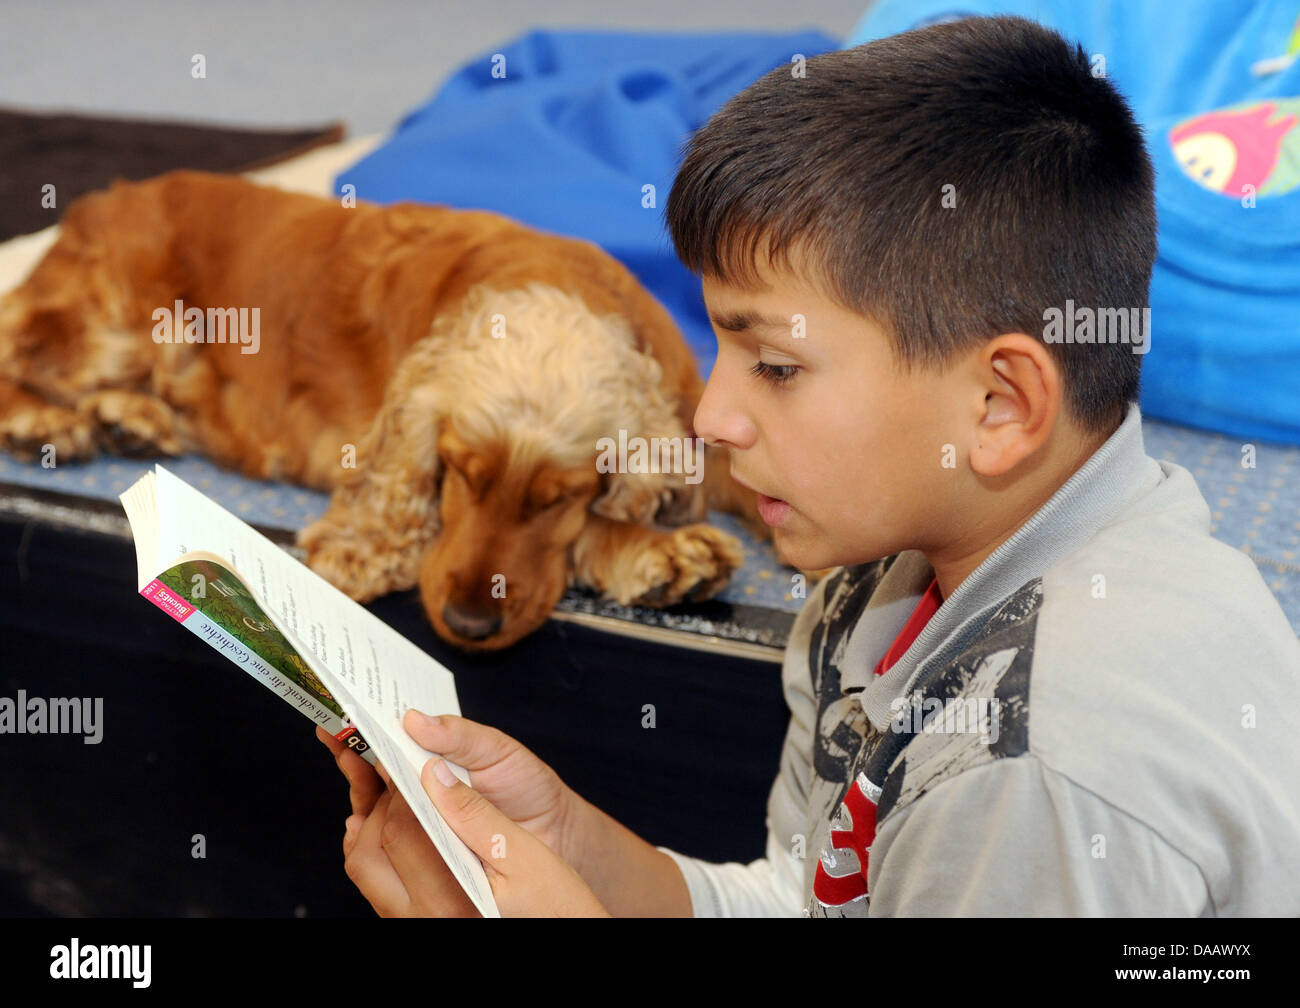 Ten-year-old pupil Valmir Krasniqi reads a story to cocker spaniel 'Loulou' in Bremen, Germany, 20 September 2011. The initiative belongs to the project 'ReadDog - Where reading is alot of fun', which is a part of a series of events on Children's Day 2011 of the Evangelical Church in Germany. Children with reading difficulties can read to animals more easily than to people. The pro Stock Photo